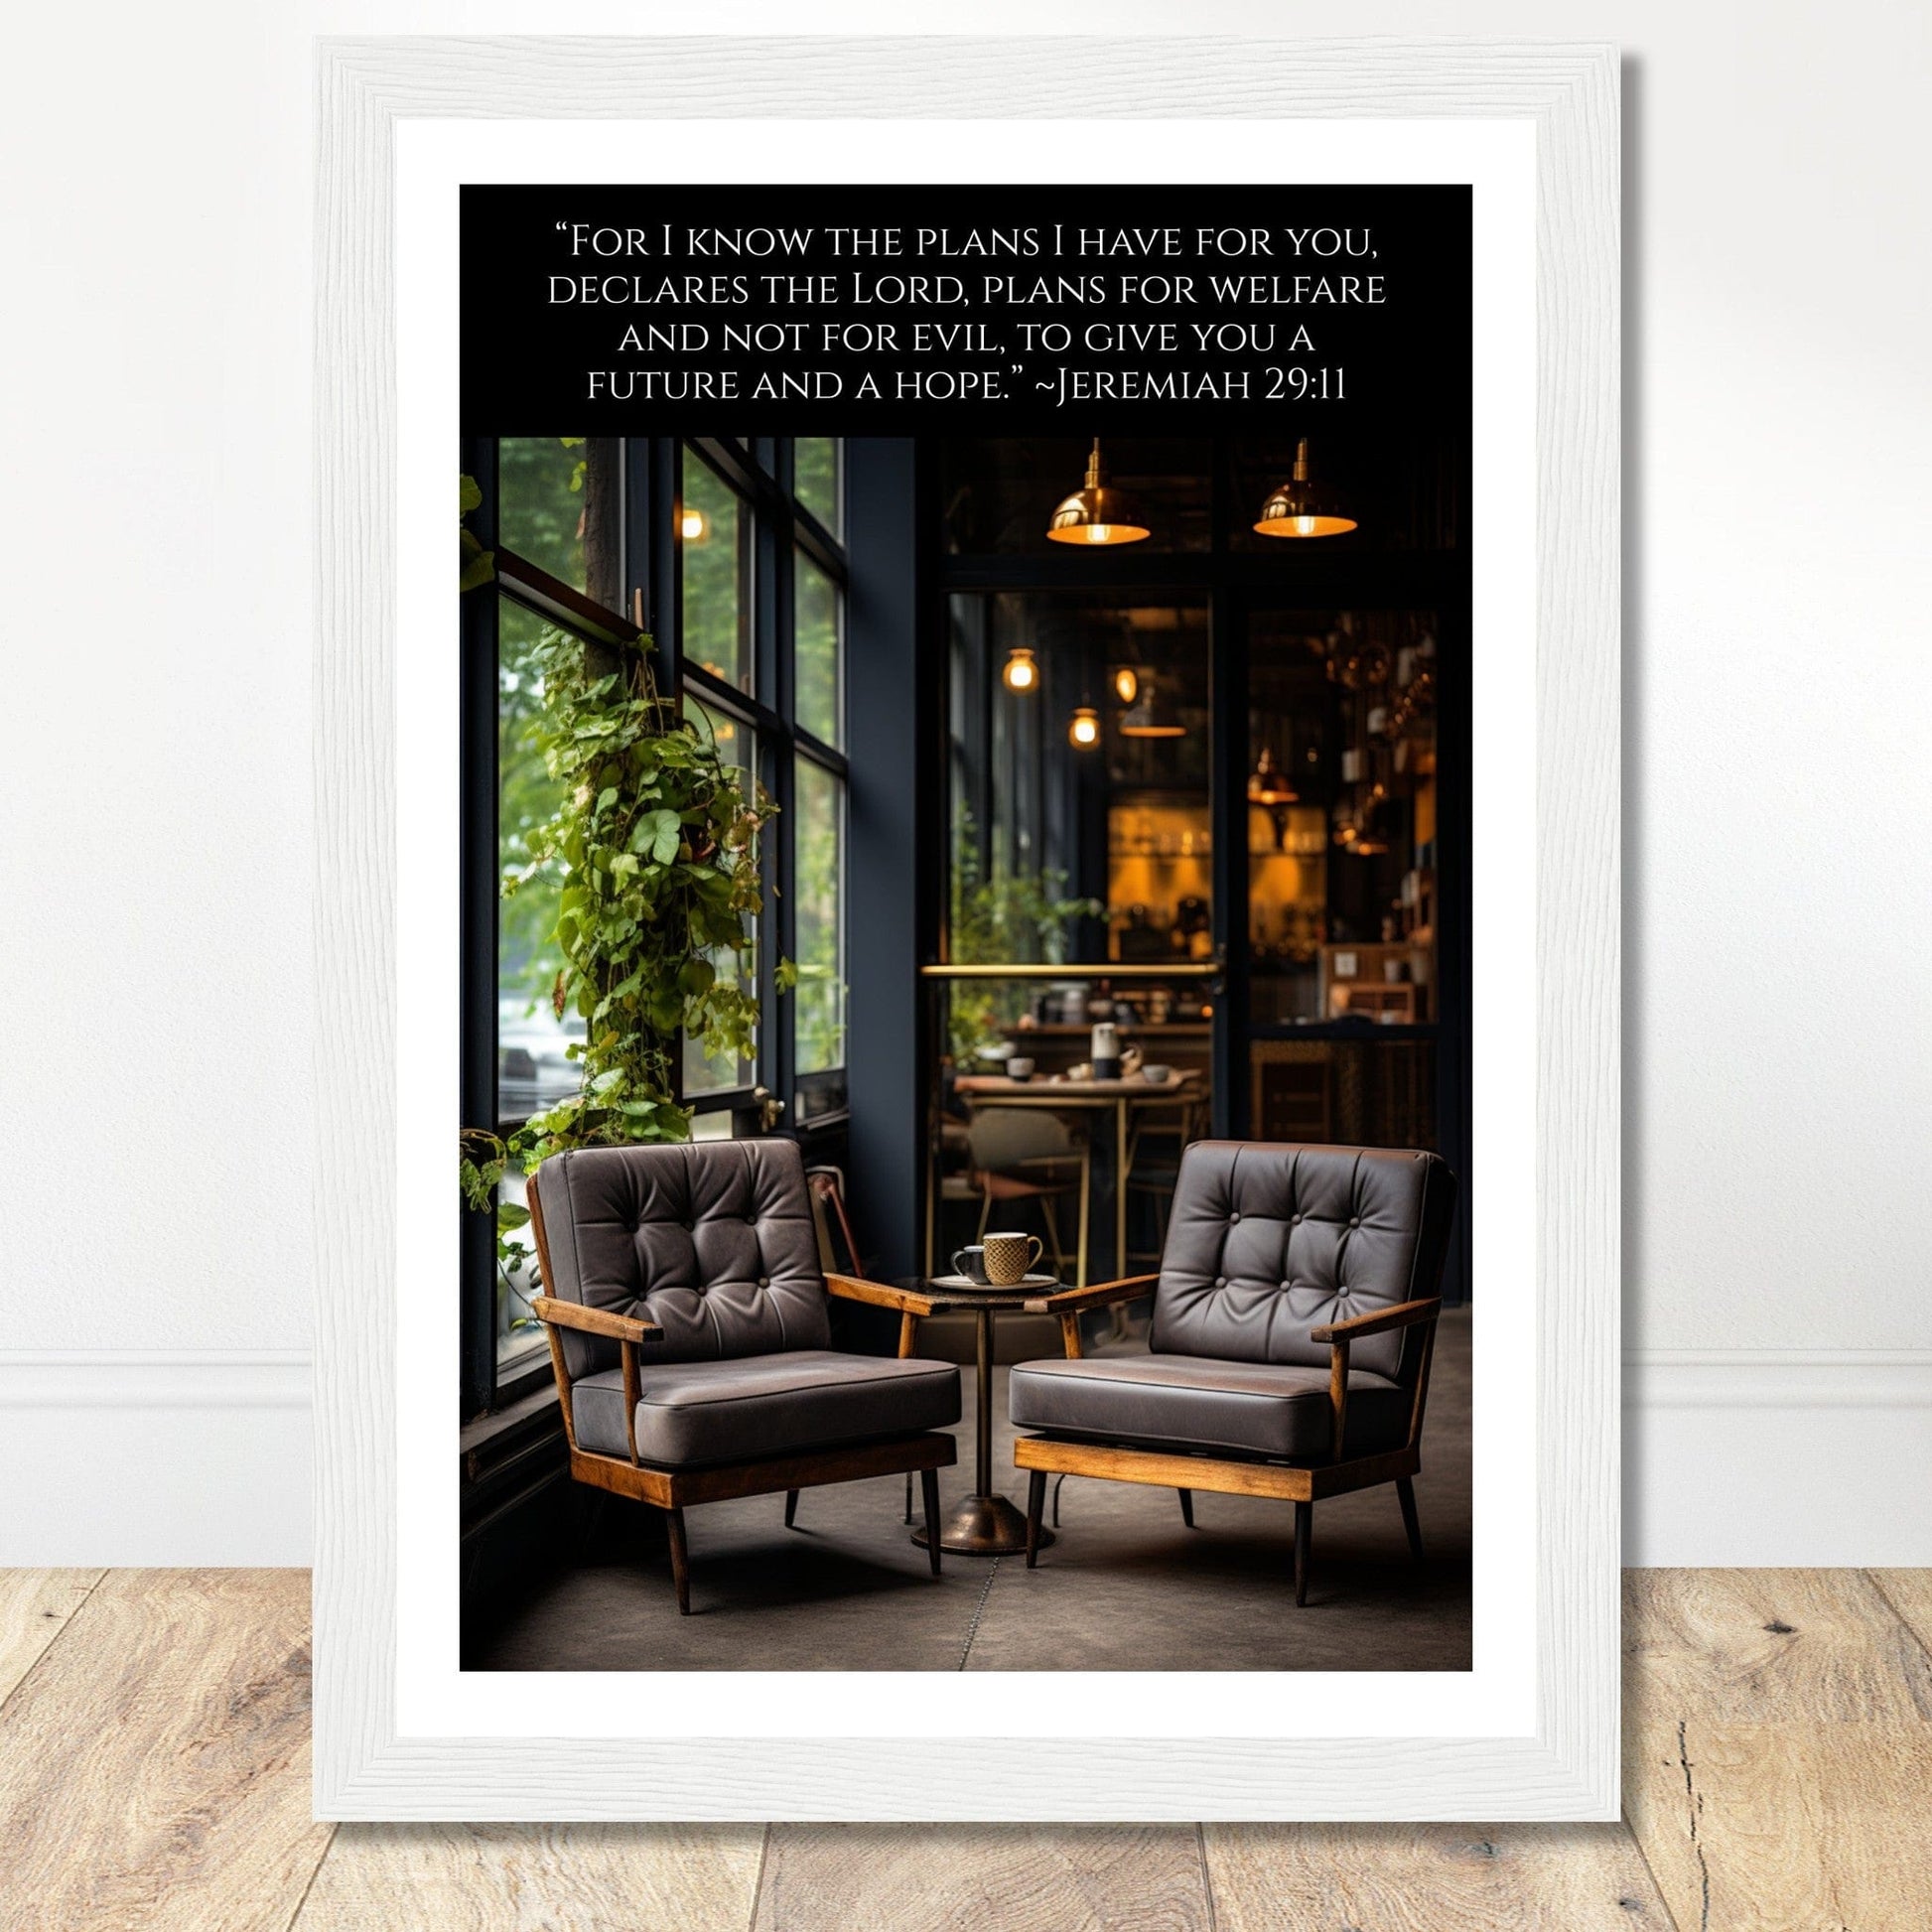 Coffee With My Father Print Material A4 21x29.7 cm / 8x12″ / Premium Matte Paper Wooden Framed Poster / White frame Framed Template